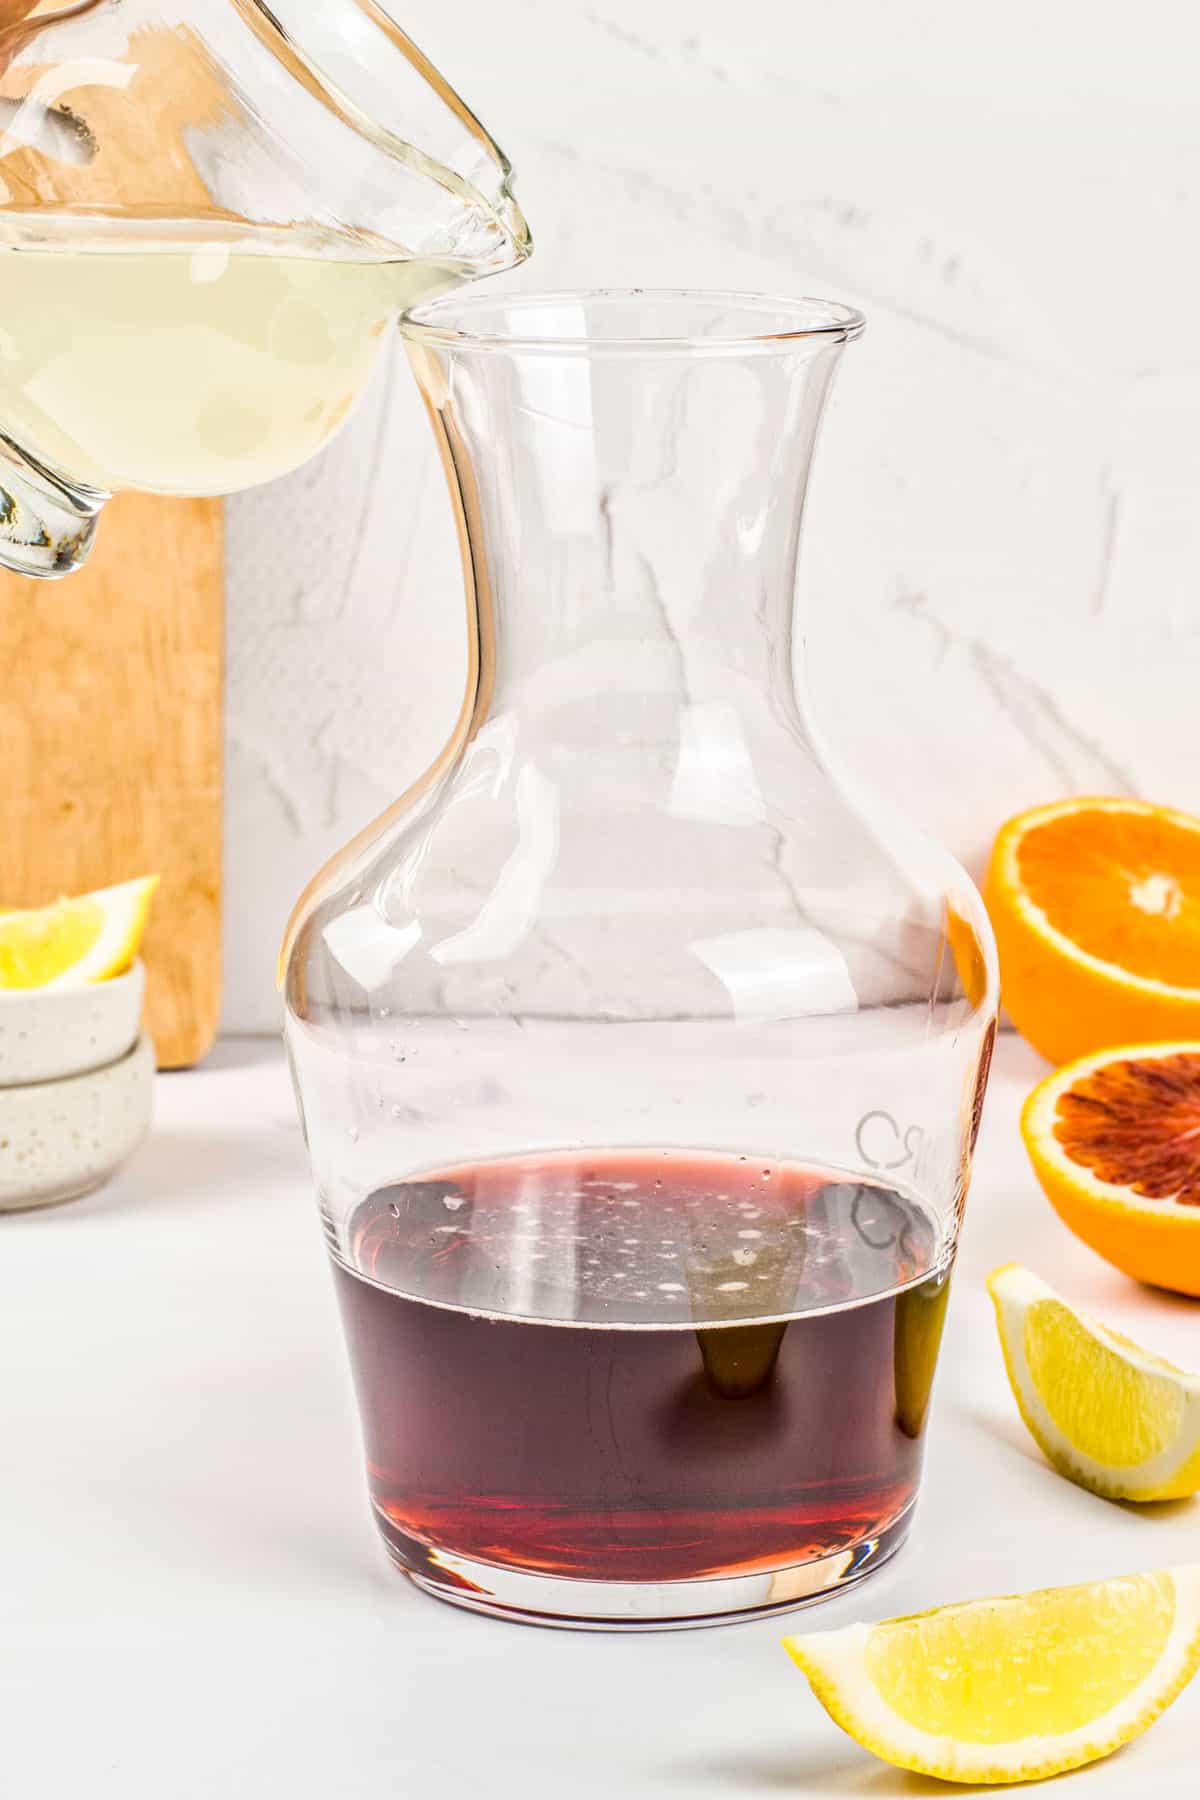 Lemon juice being poured into a pitcher of red wine.